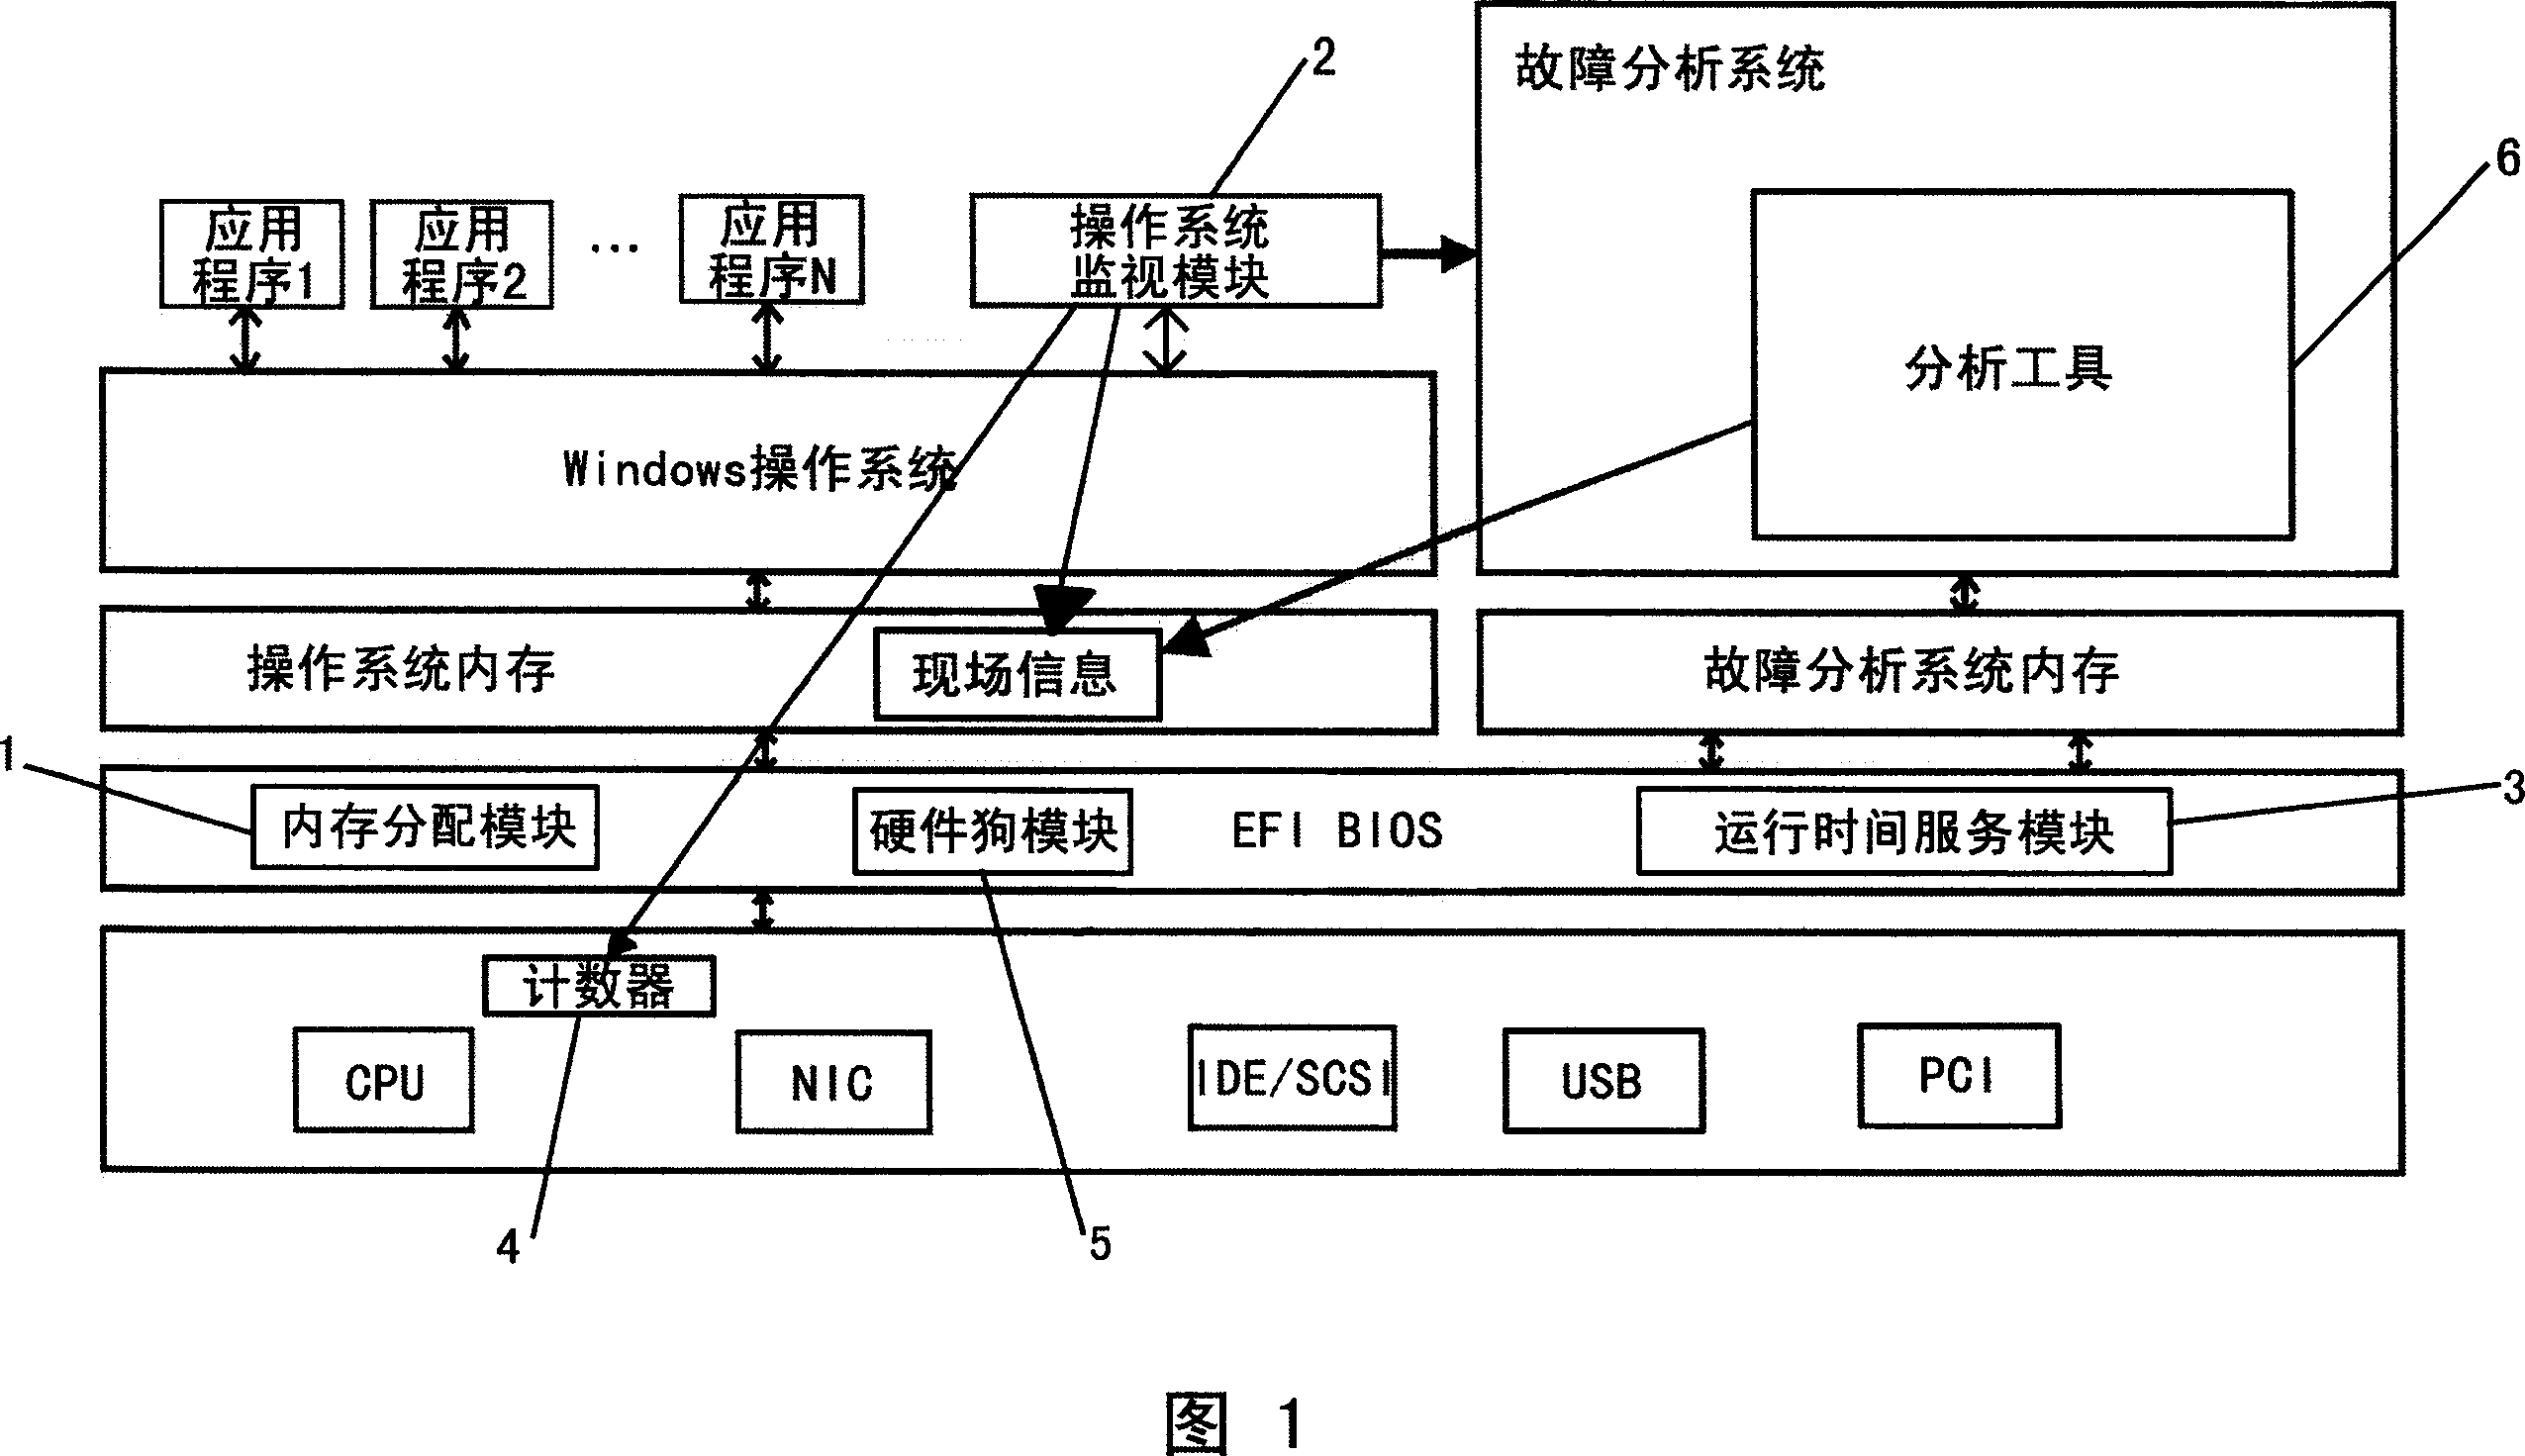 System and method for obtaining fault in-situ information for computer operating system